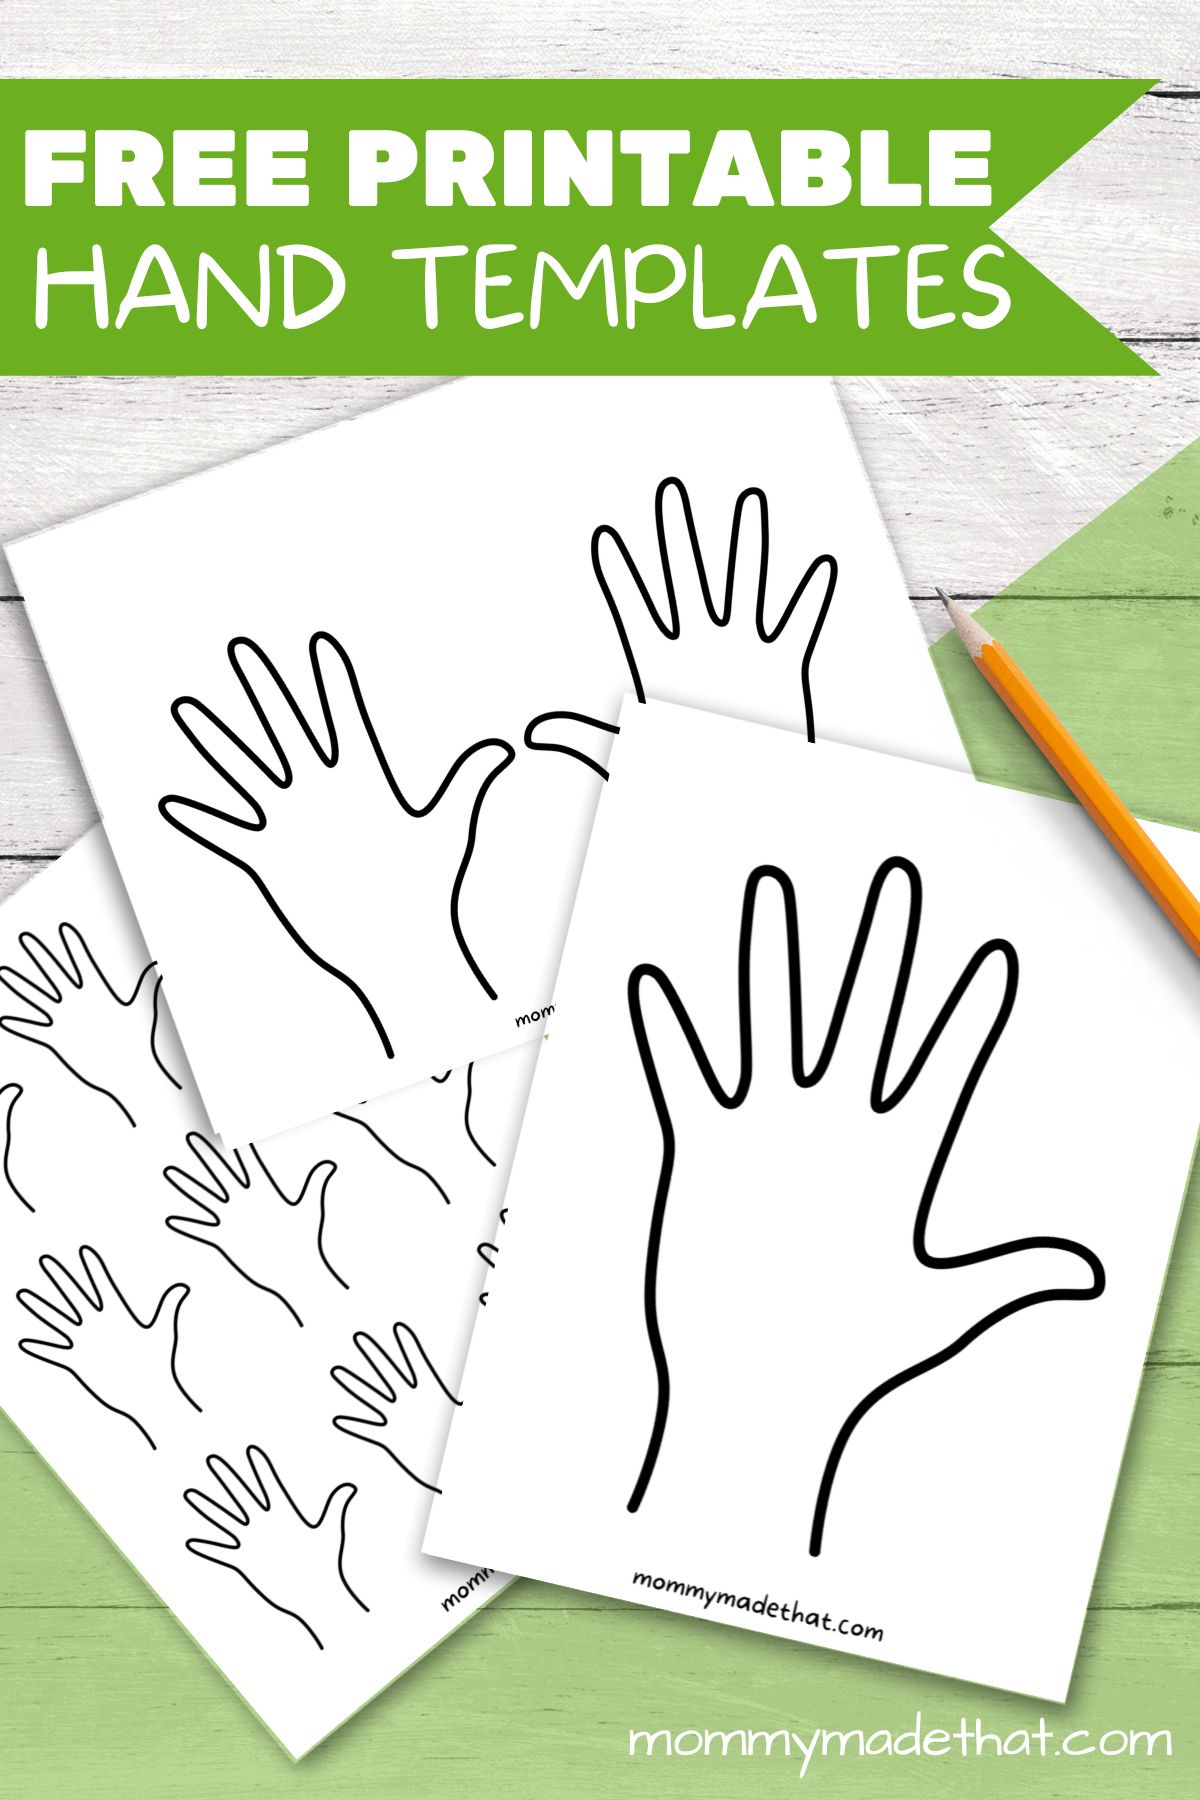 Hand outlines and templates